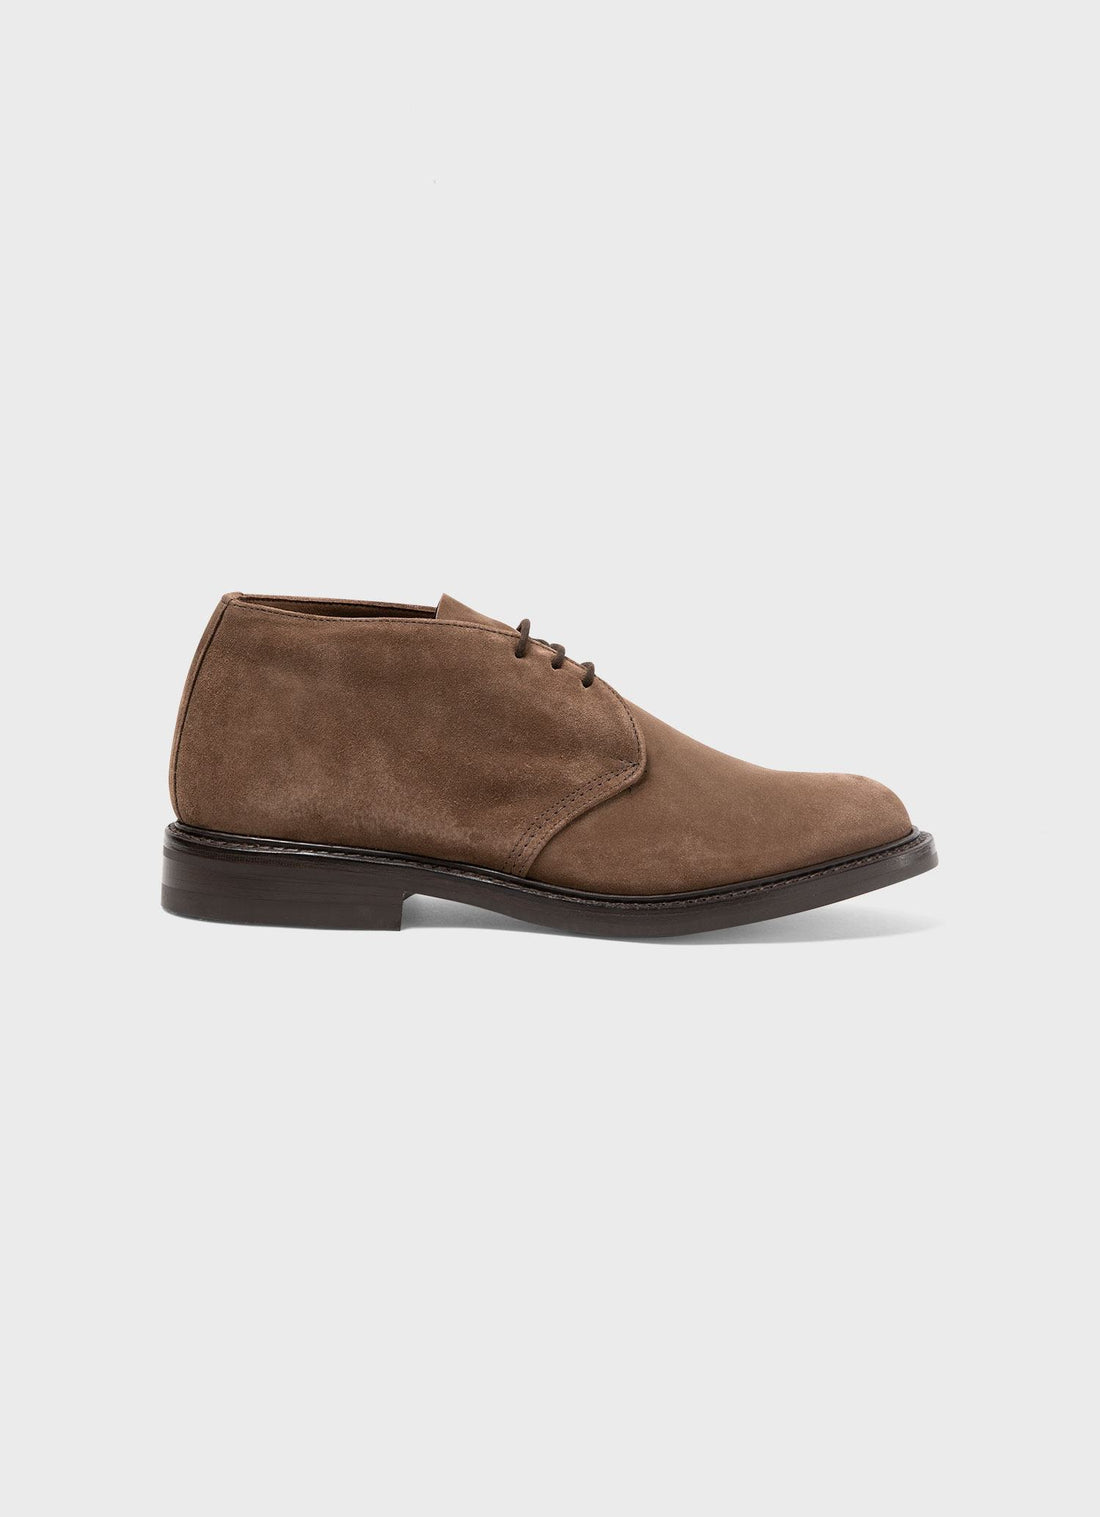 Men's Suede Ankle Boot in Light Brown